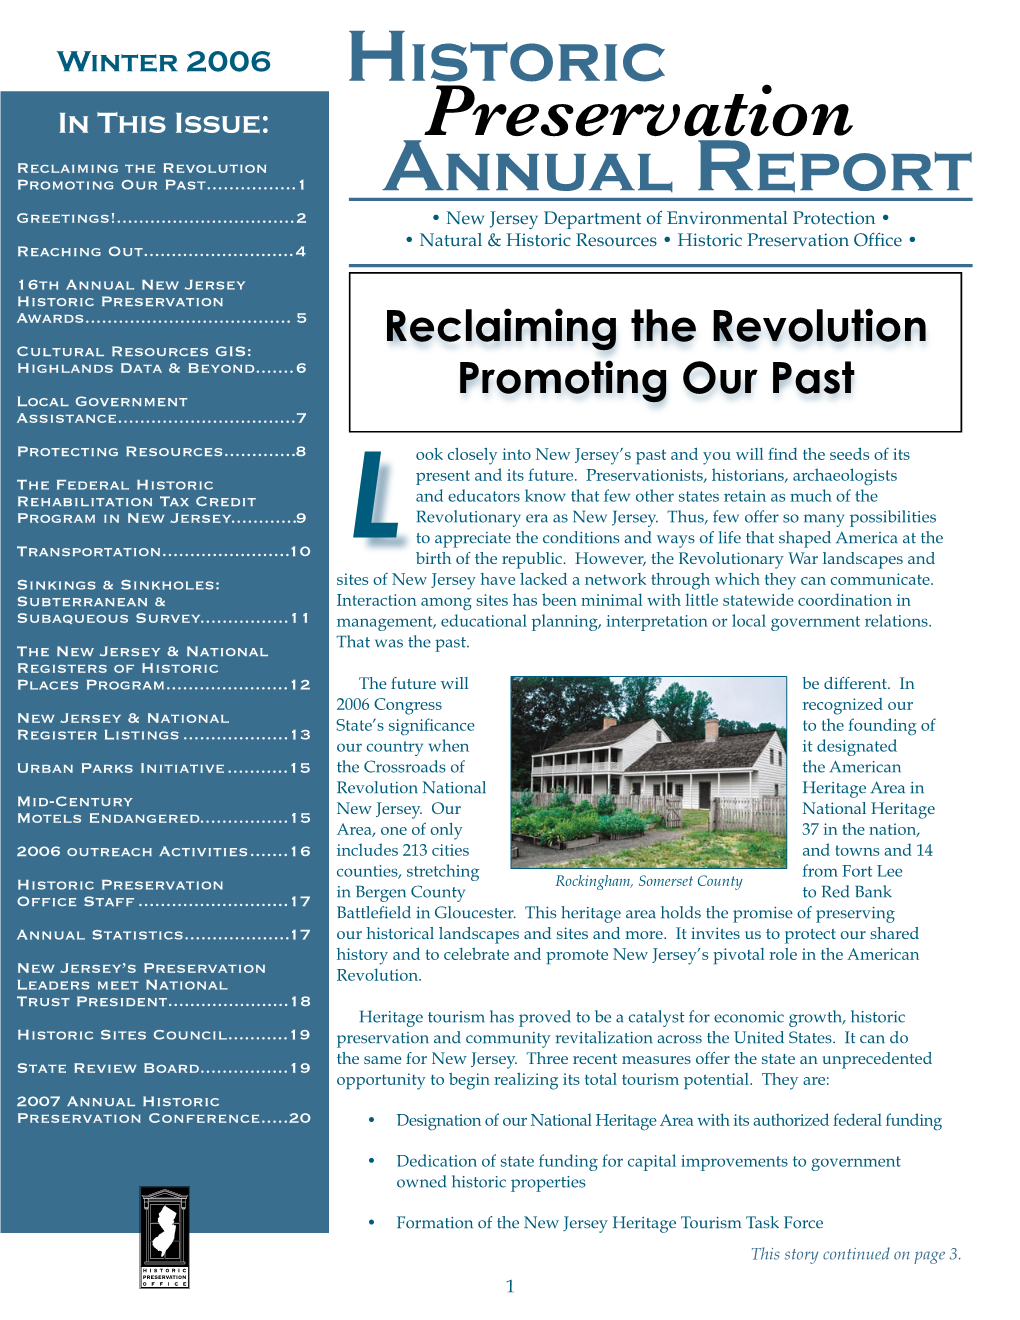 Historic Preservation Annual Report